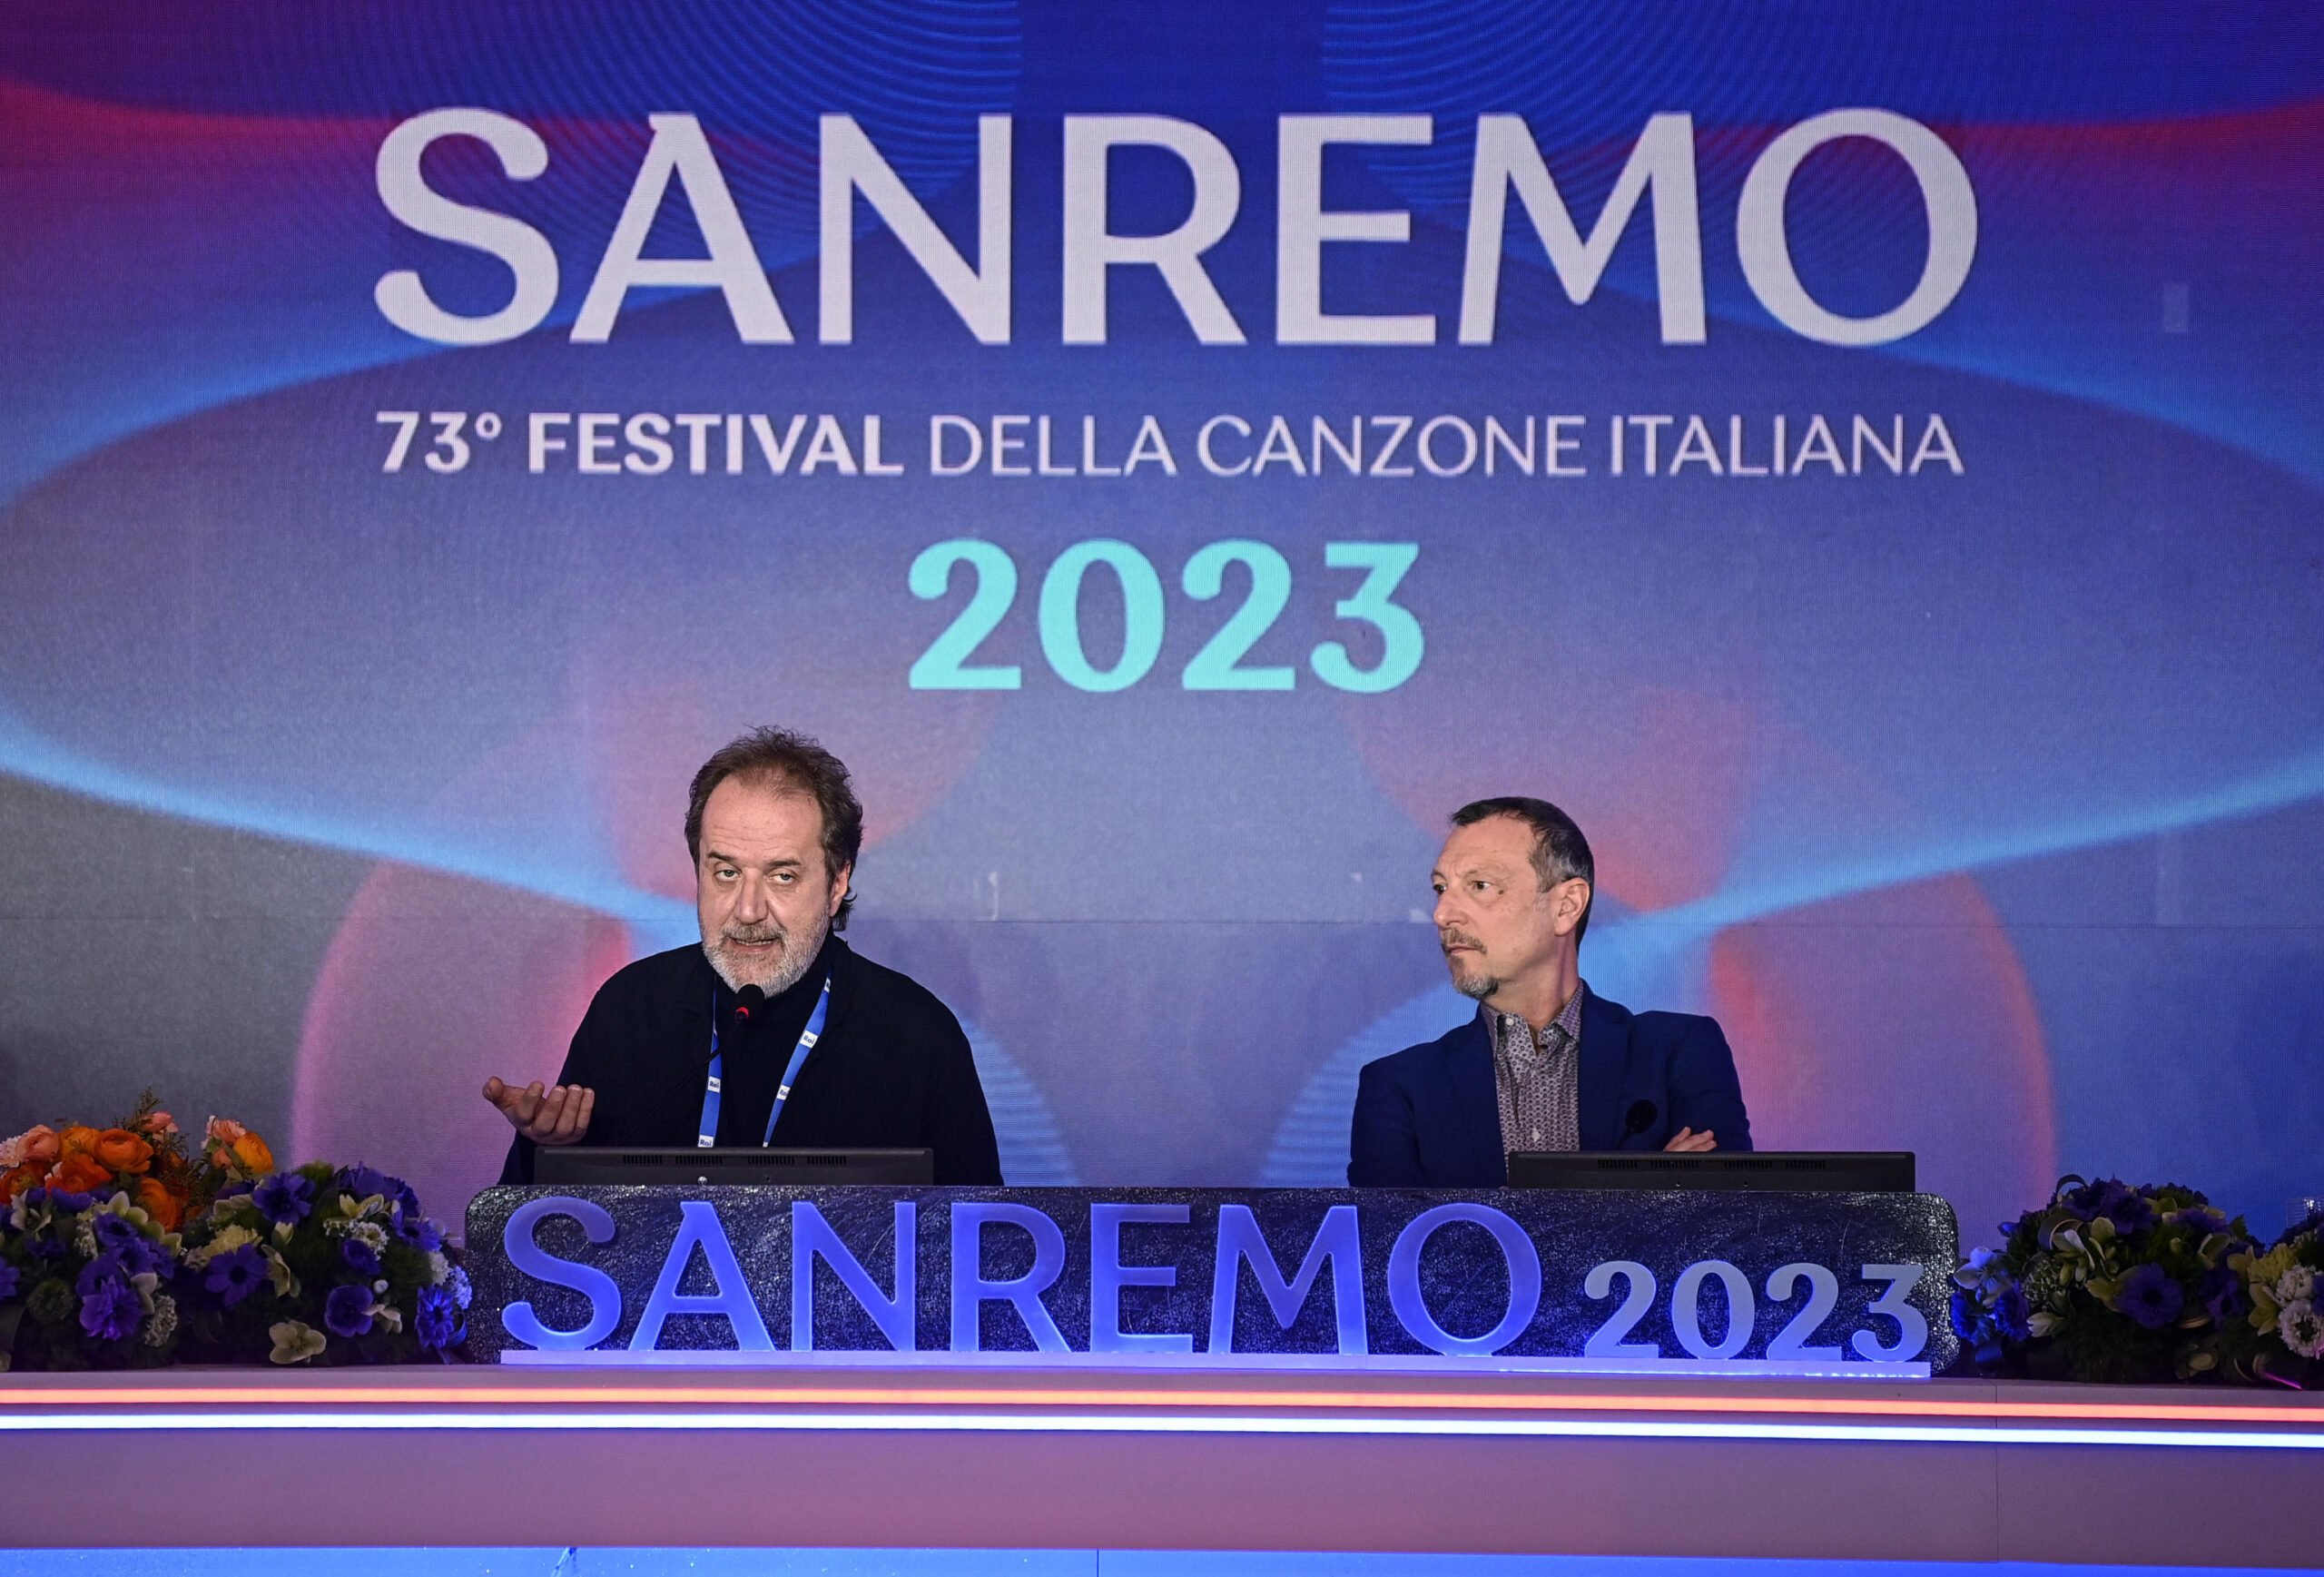 Sanremo Festival host and artistic director Amadeus (R) and Italian Rai 1 TV Director, Stefano Coletta (L) during a press conference at the 73rd Sanremo Italian Song Festival, in Sanremo, Italy, 10 February 2023. The music festival will run from 07 to 11 February 2023.  ANSA/RICCARDO ANTIMIANI